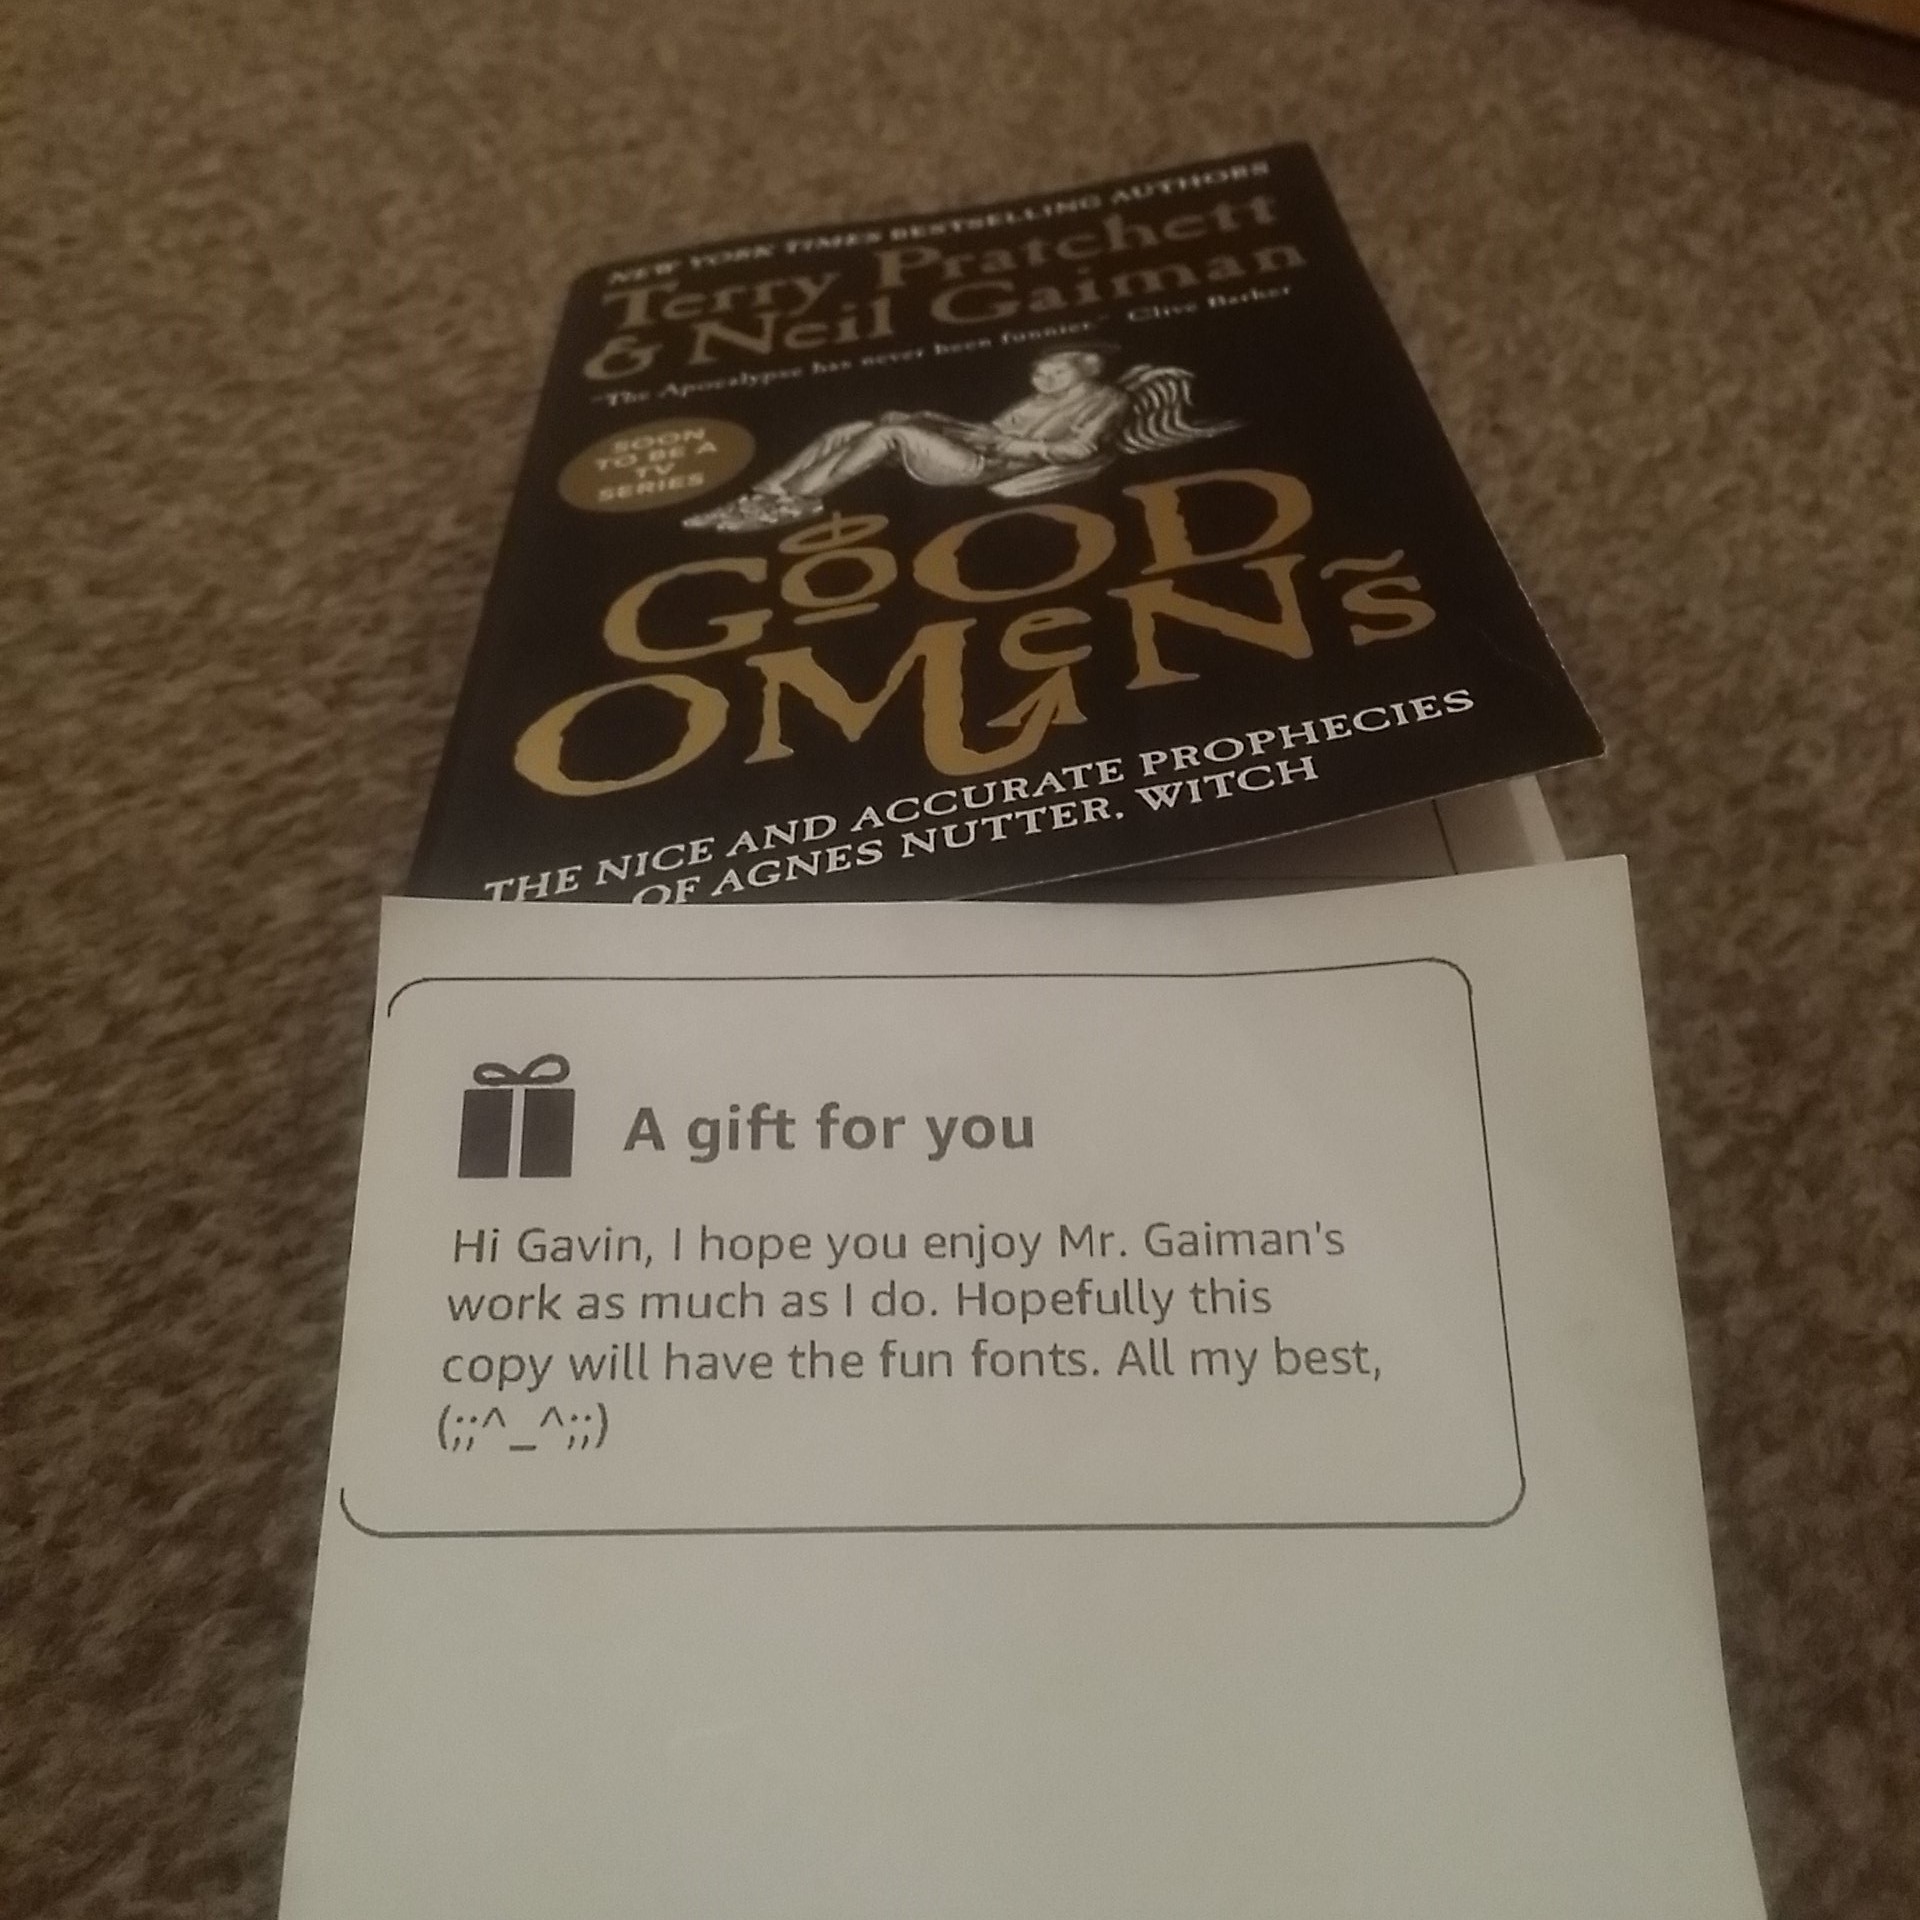 Picture of Good Omens with a personalised gift note